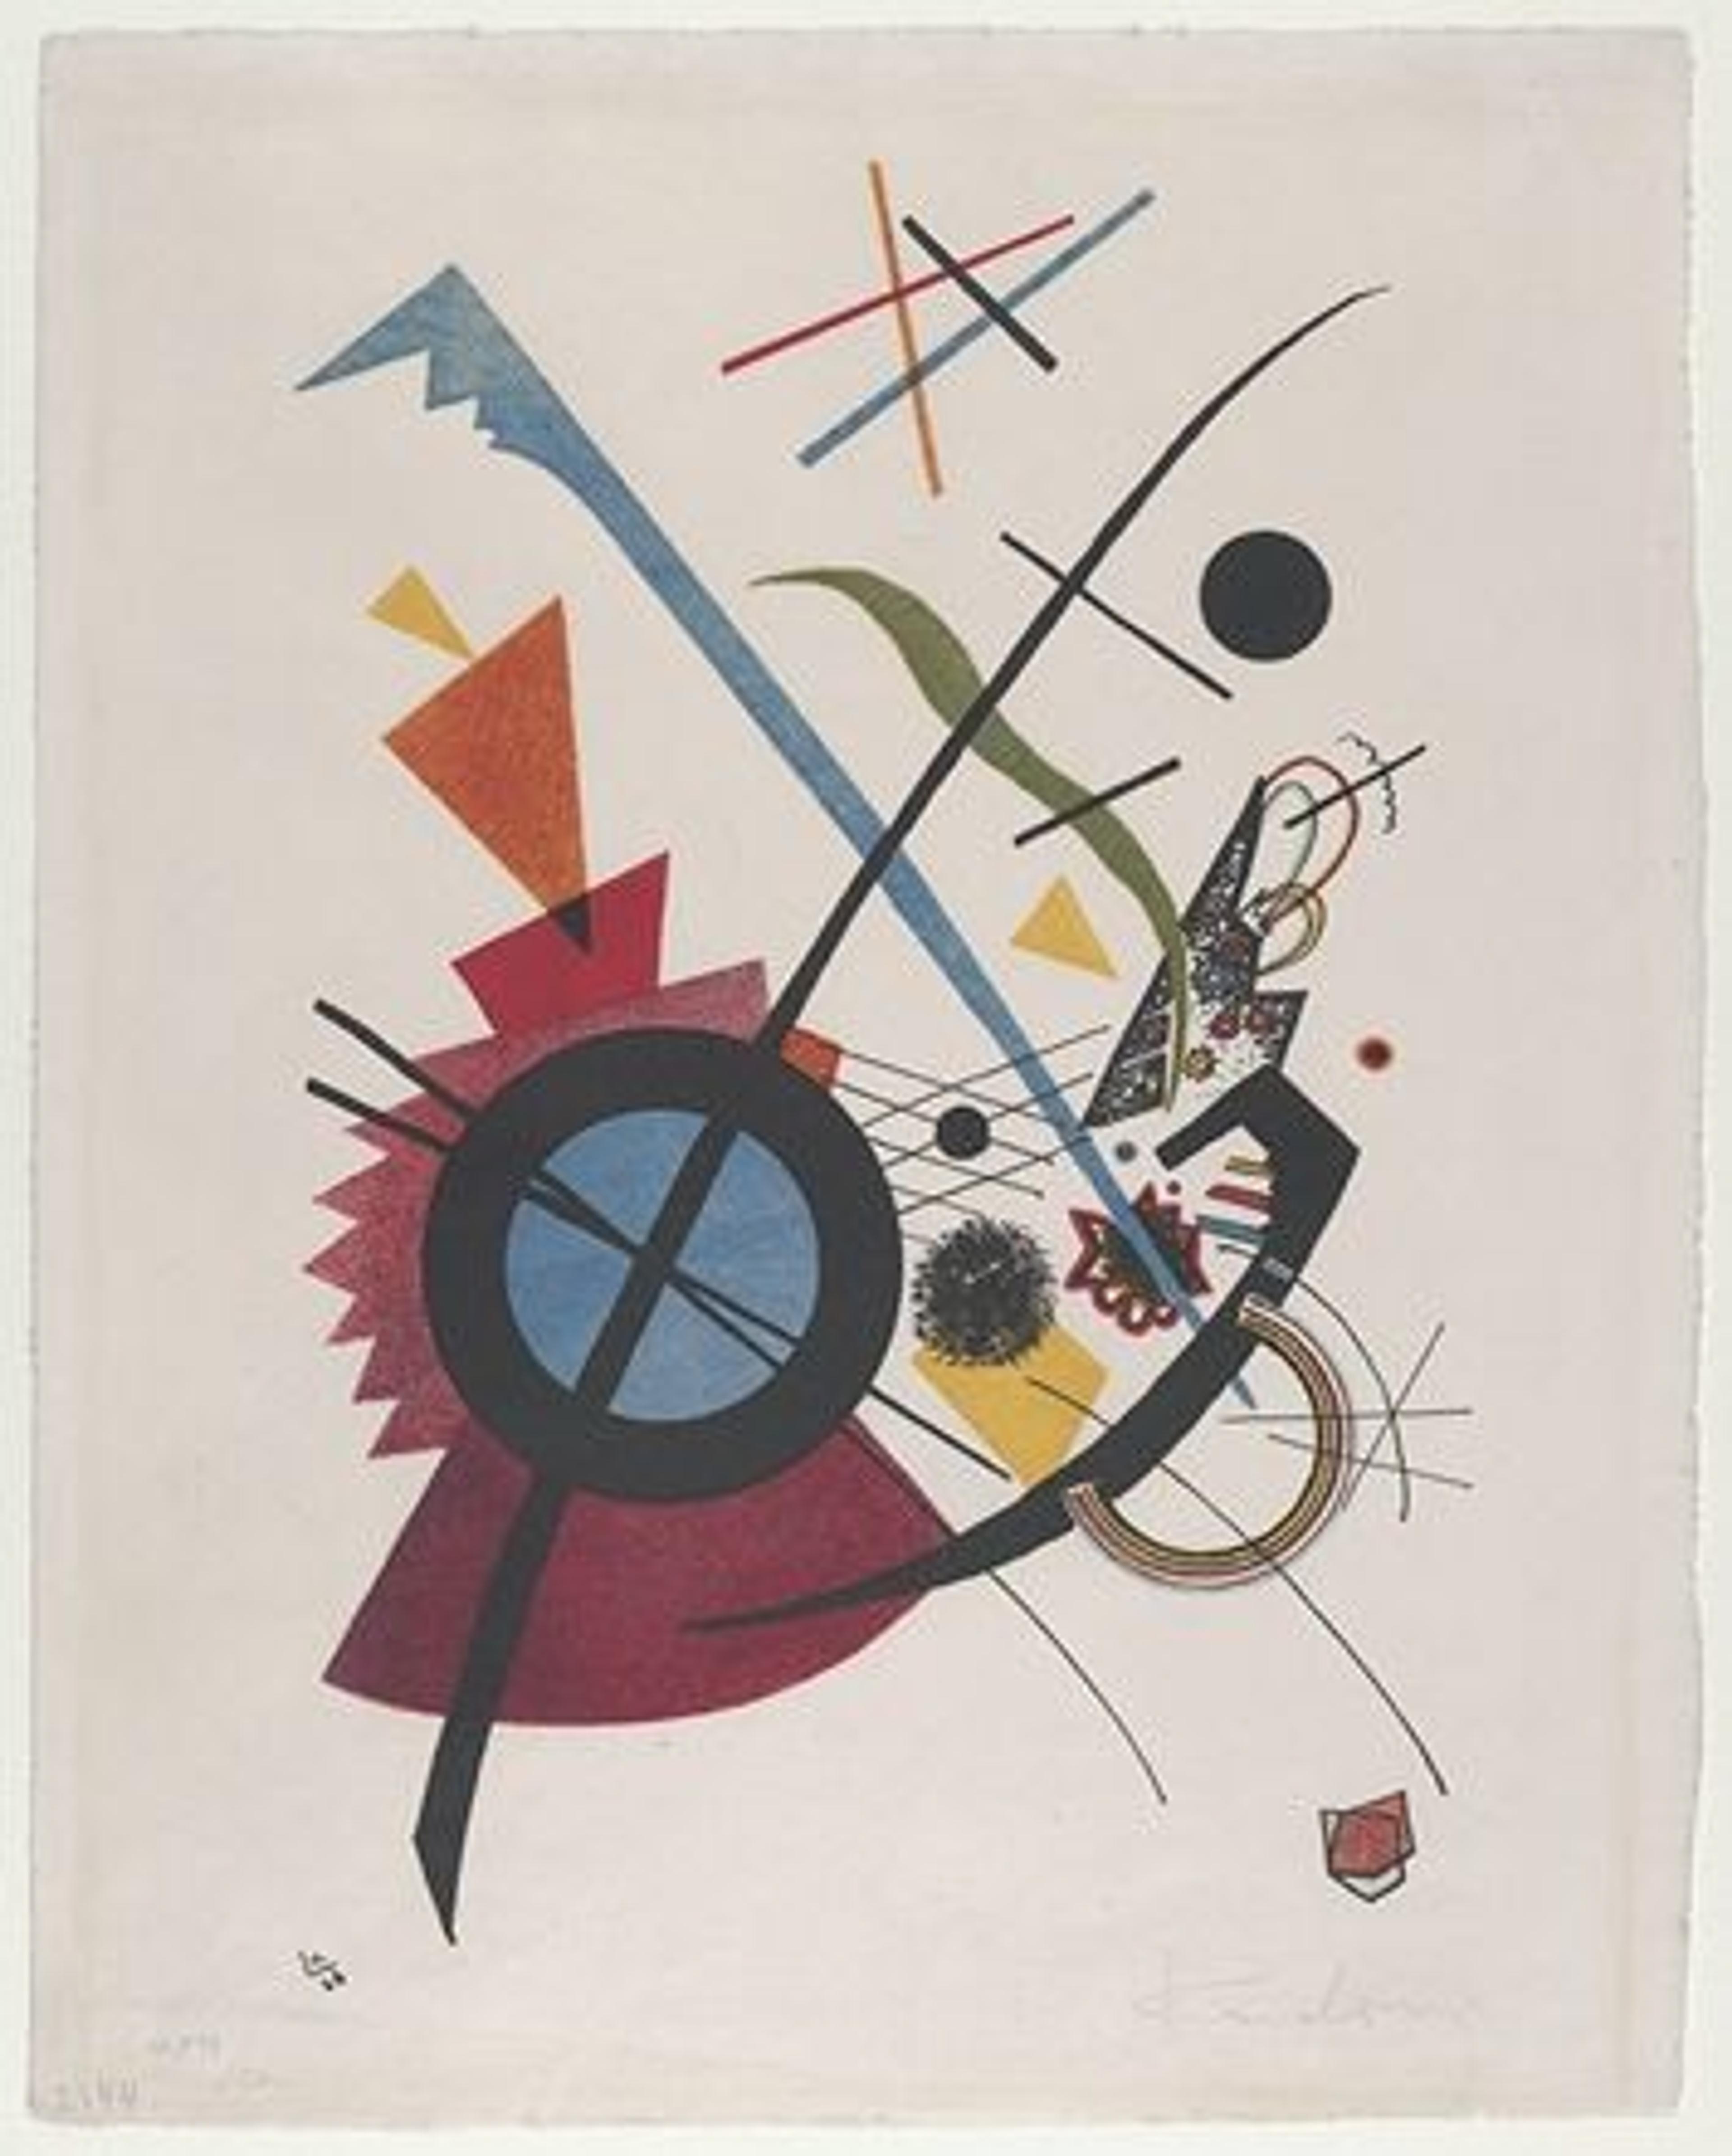 Violett, 1923, by Vasily Kandinsky, a lithograph with red, yellow, blue, and black geometric shapes.